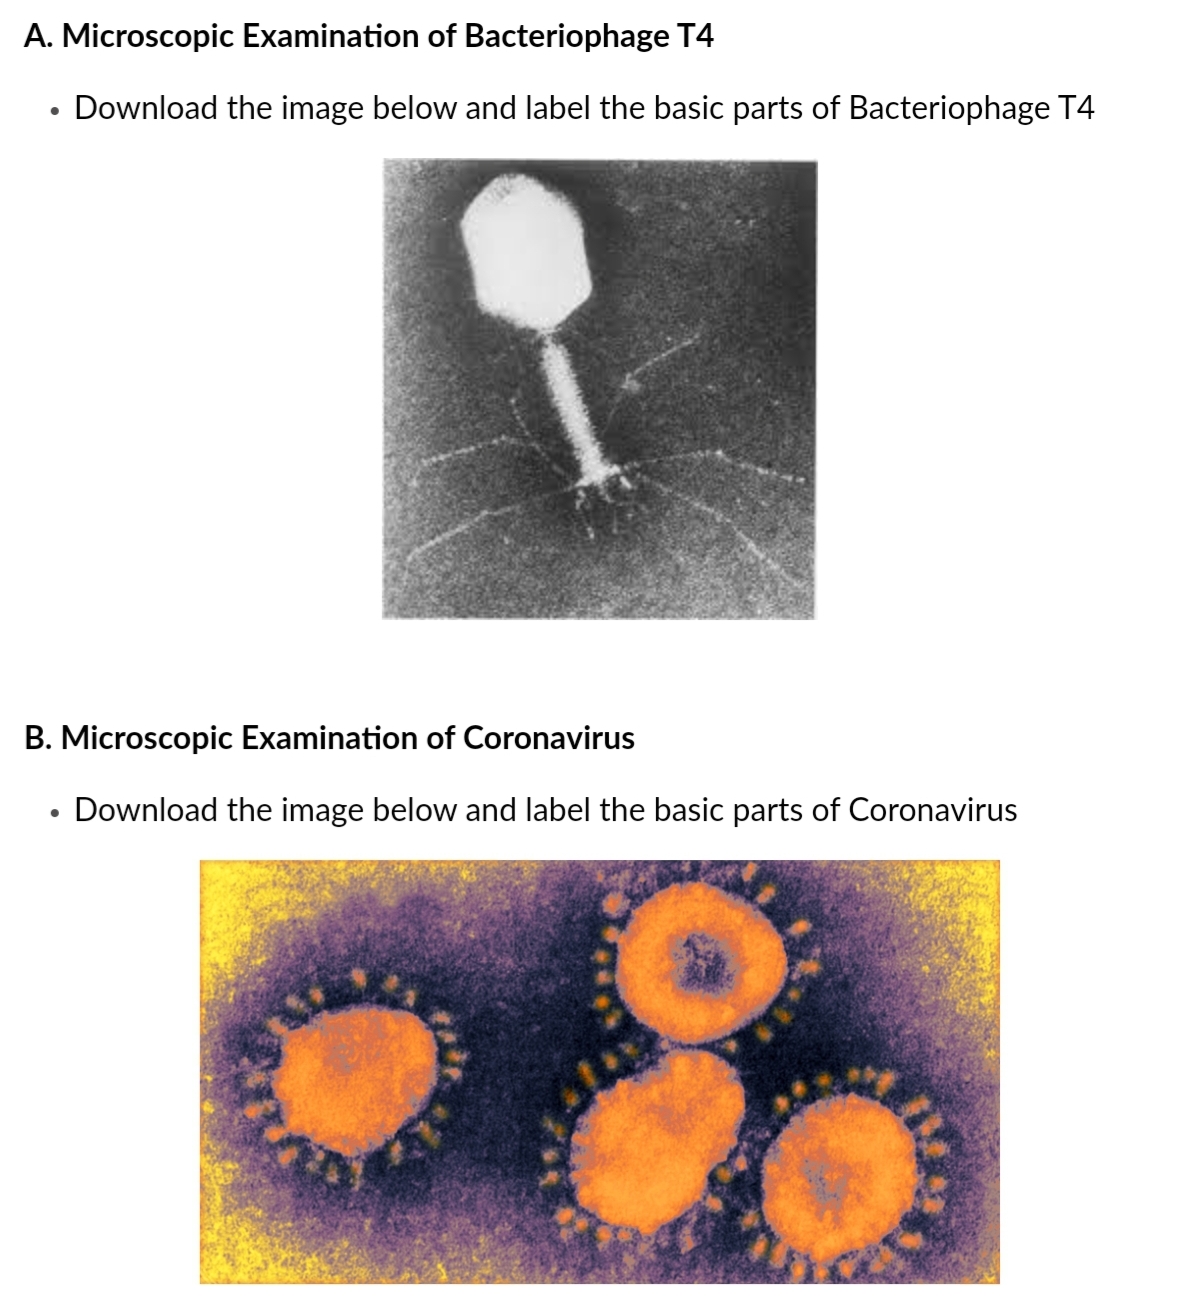 A. Microscopic Examination of Bacteriophage T4
Download the image below and label the basic parts of Bacteriophage T4
B. Microscopic Examination of Coronavirus
Download the image below and label the basic parts of Coronavirus
